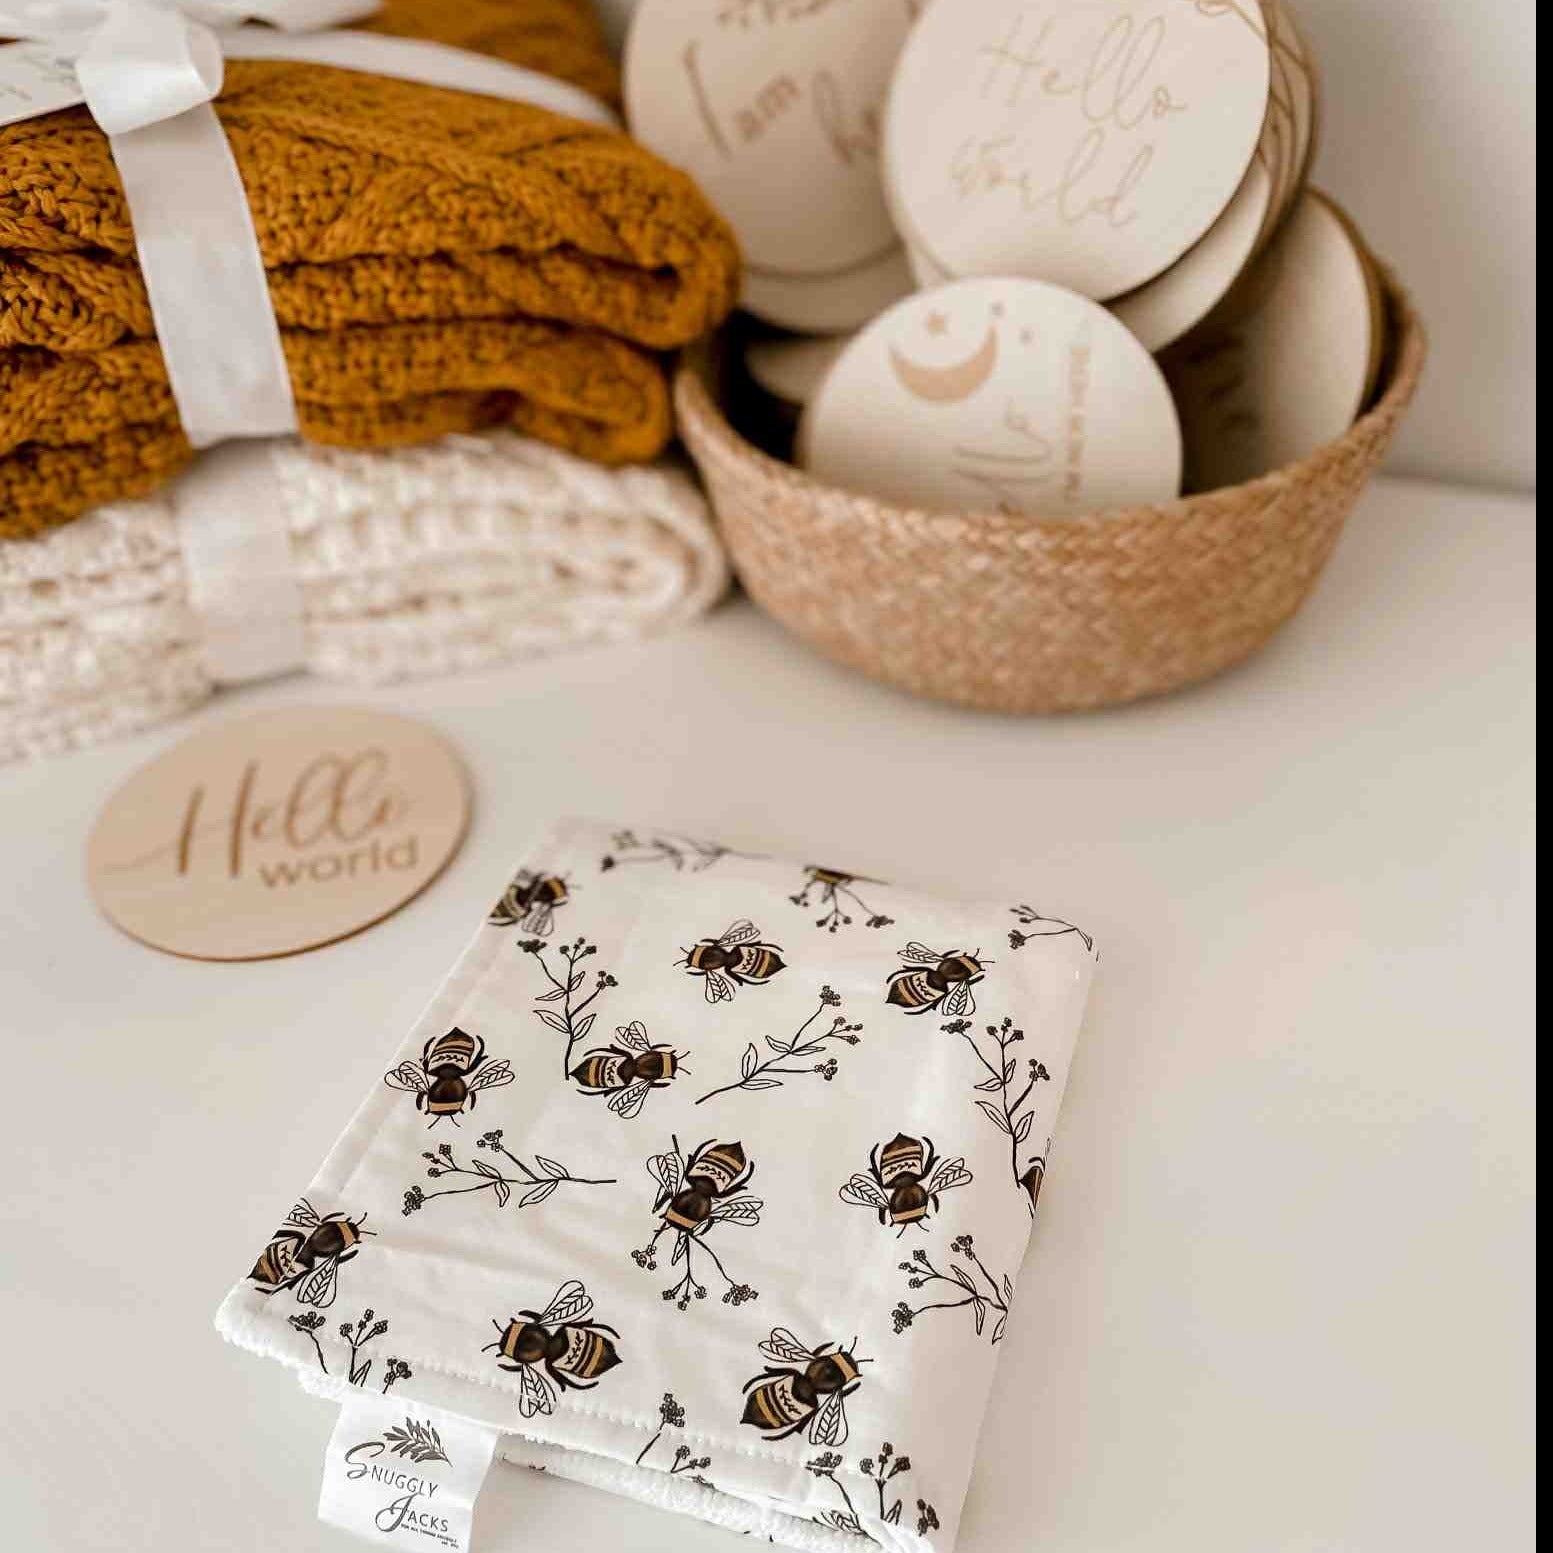 Honey and Cream Knitted Blankets beside a Burp cloth with bees yellow print placed next to an announcement disk located in Canada